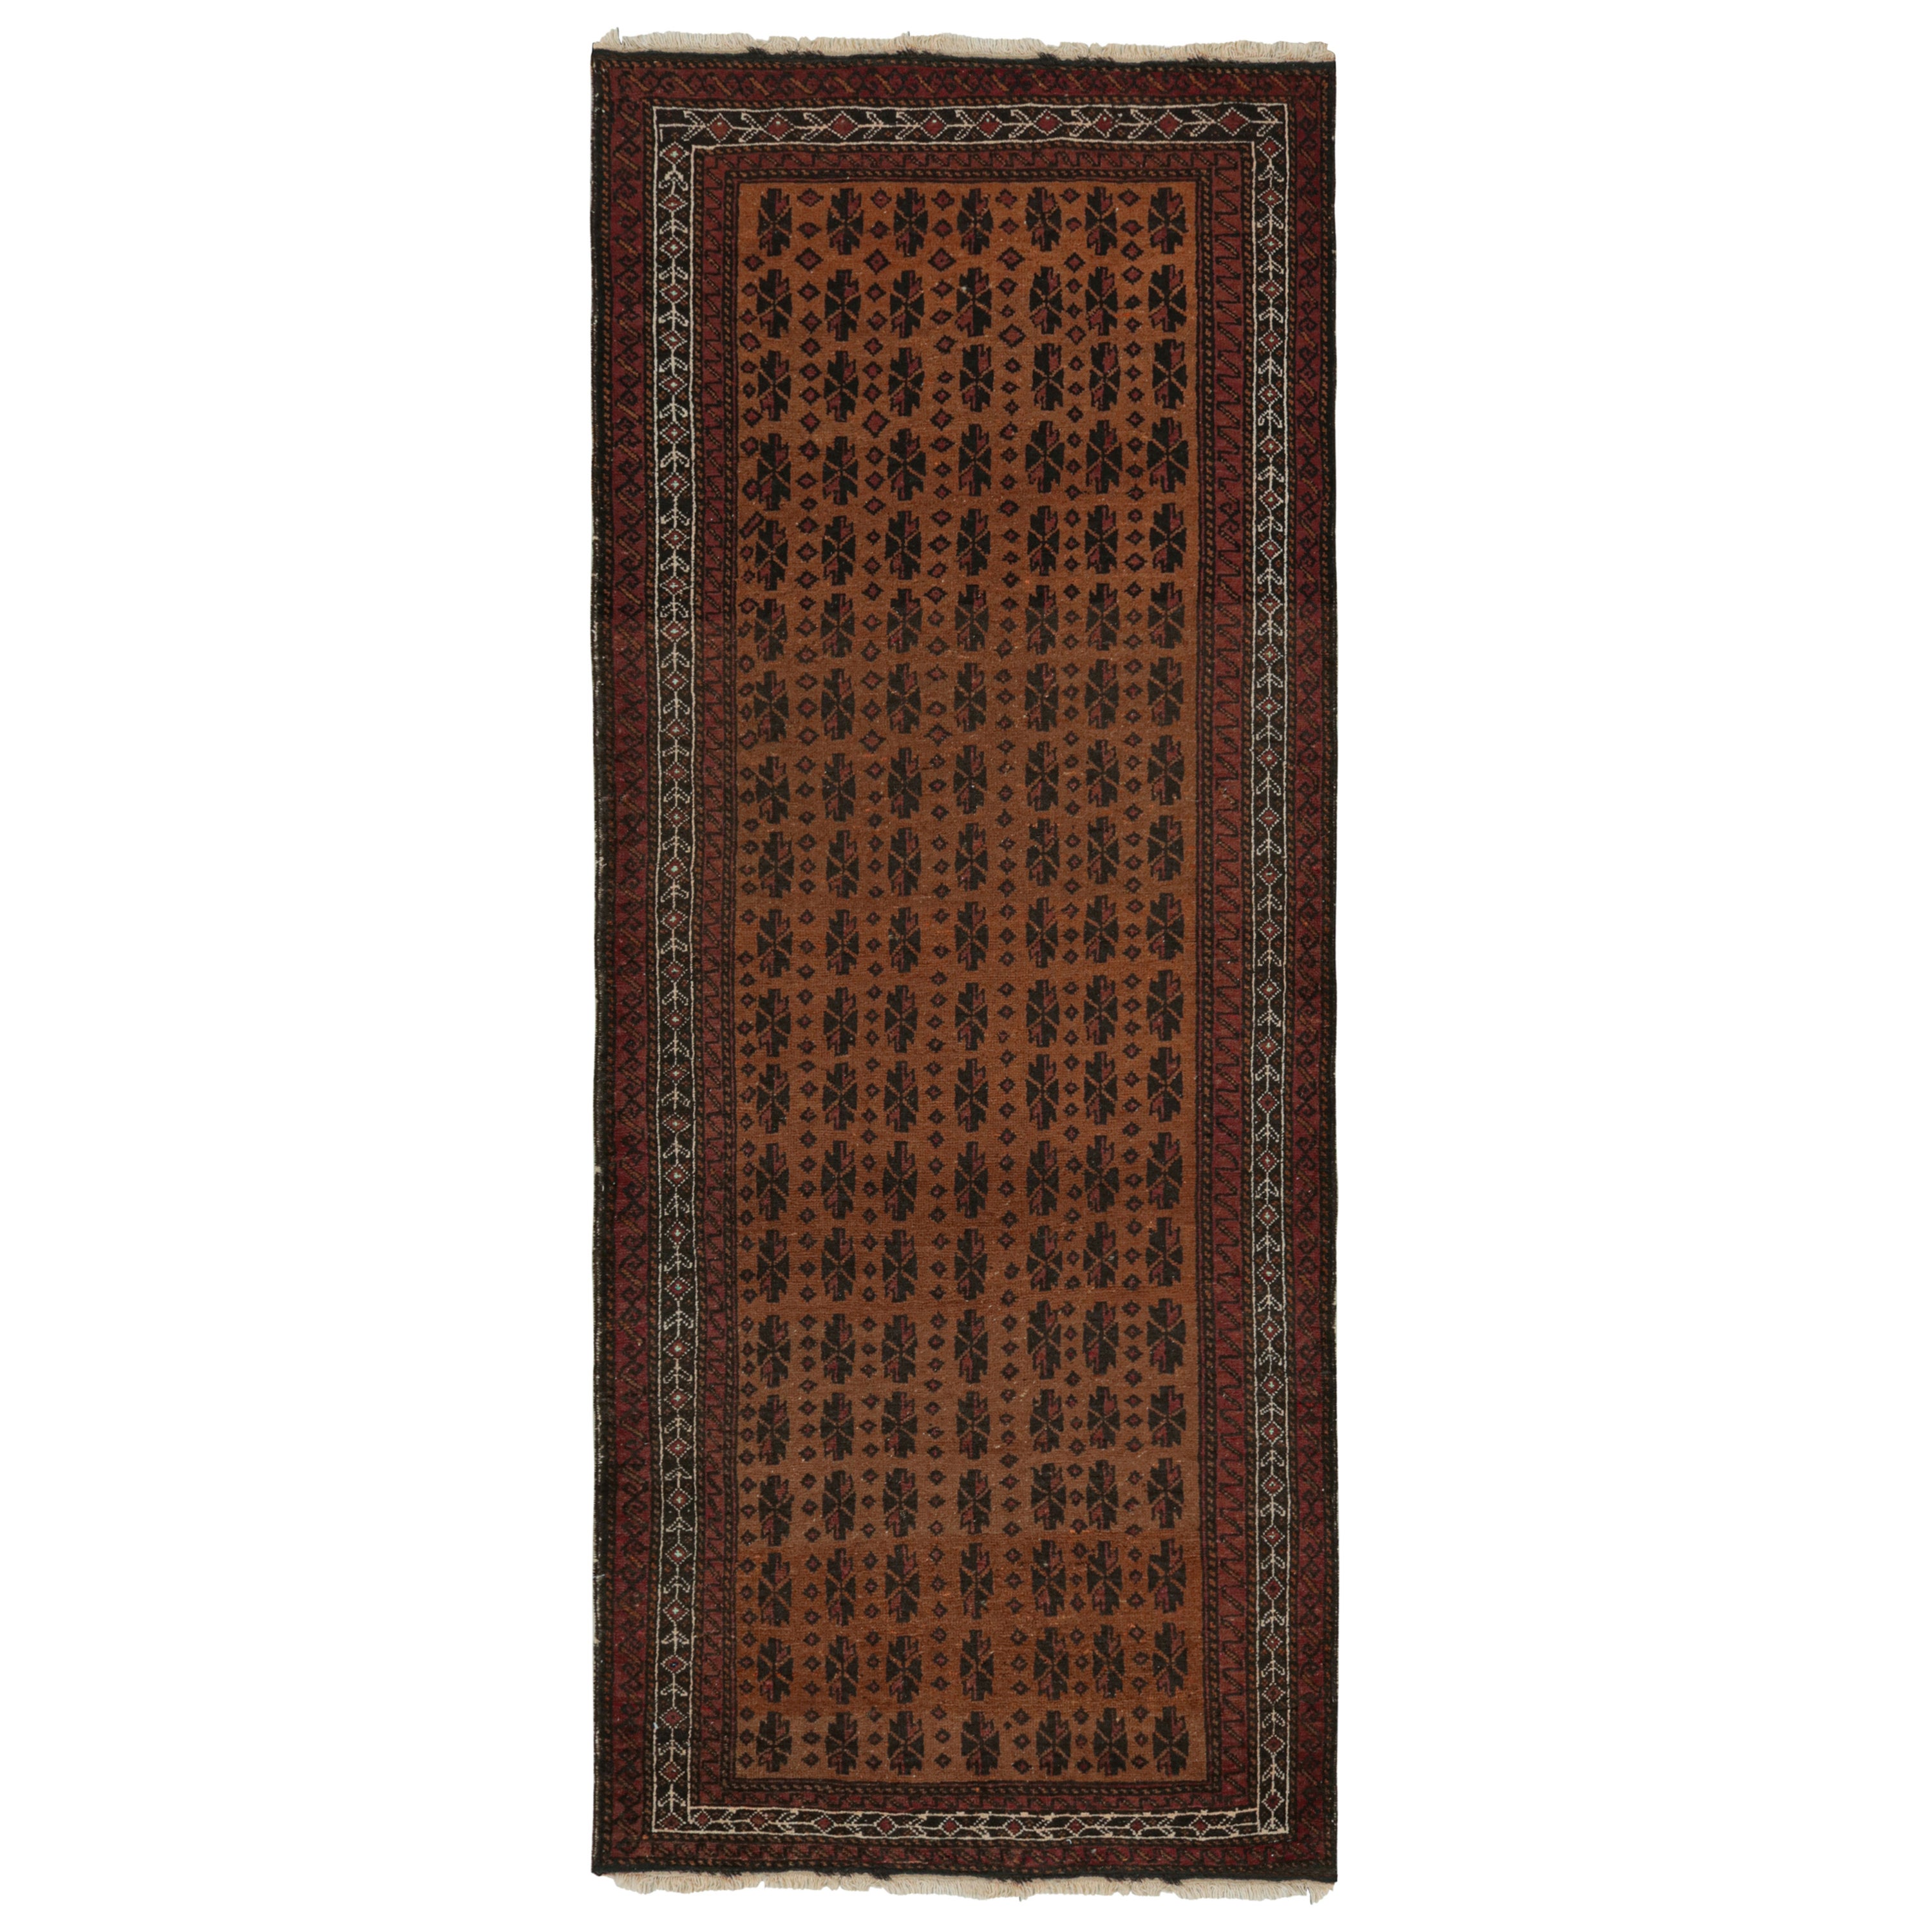 Vintage Persian Baluch Runner in Brown with Geometric Patterns, from Rug & Kilim